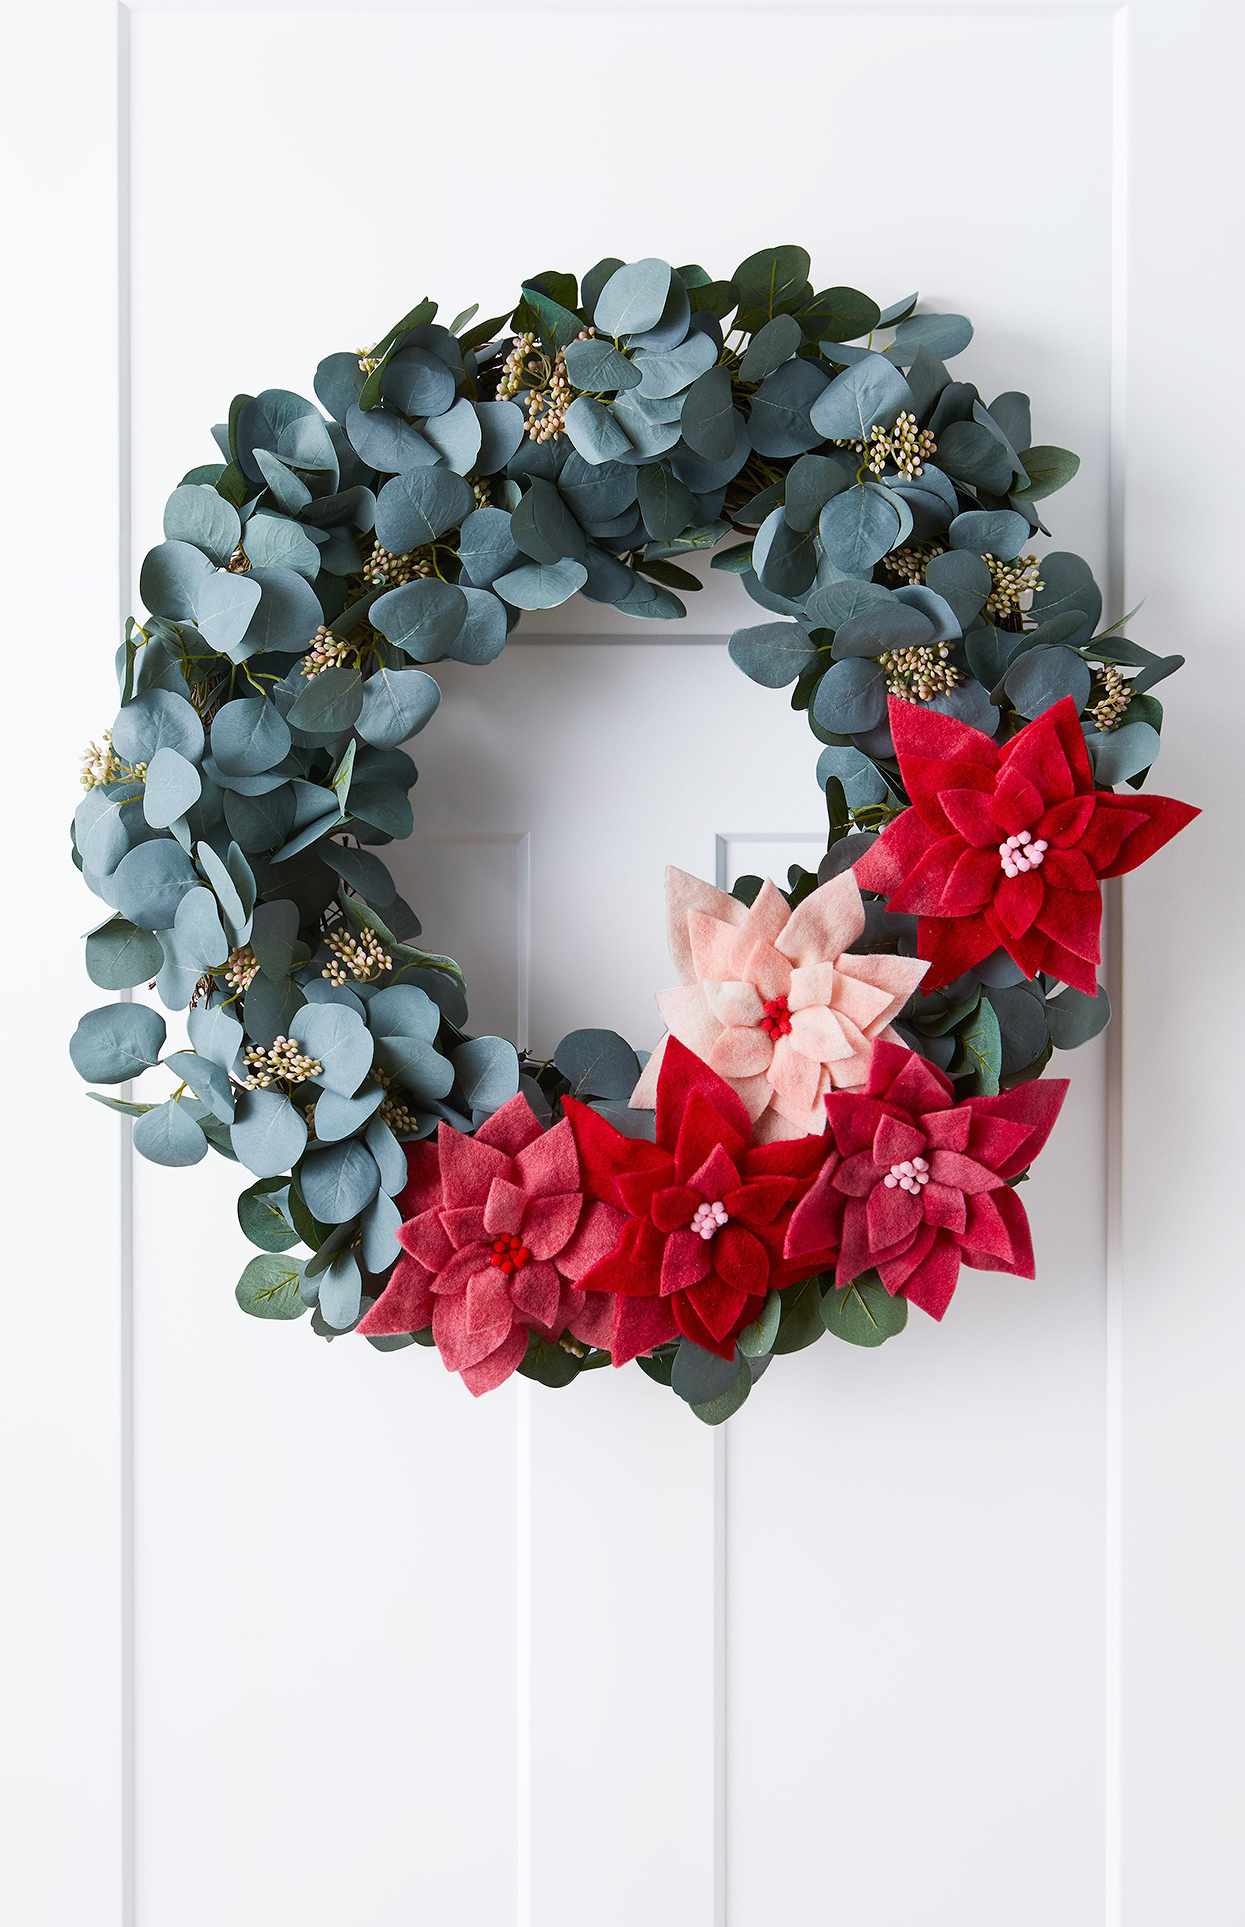 Bowknots Flowers and Berries and Balls IronBuddy 16 Christmas Wreath Artificial Wreath with Pinecones Christmas Decor Wreath for Front Door Wall Window